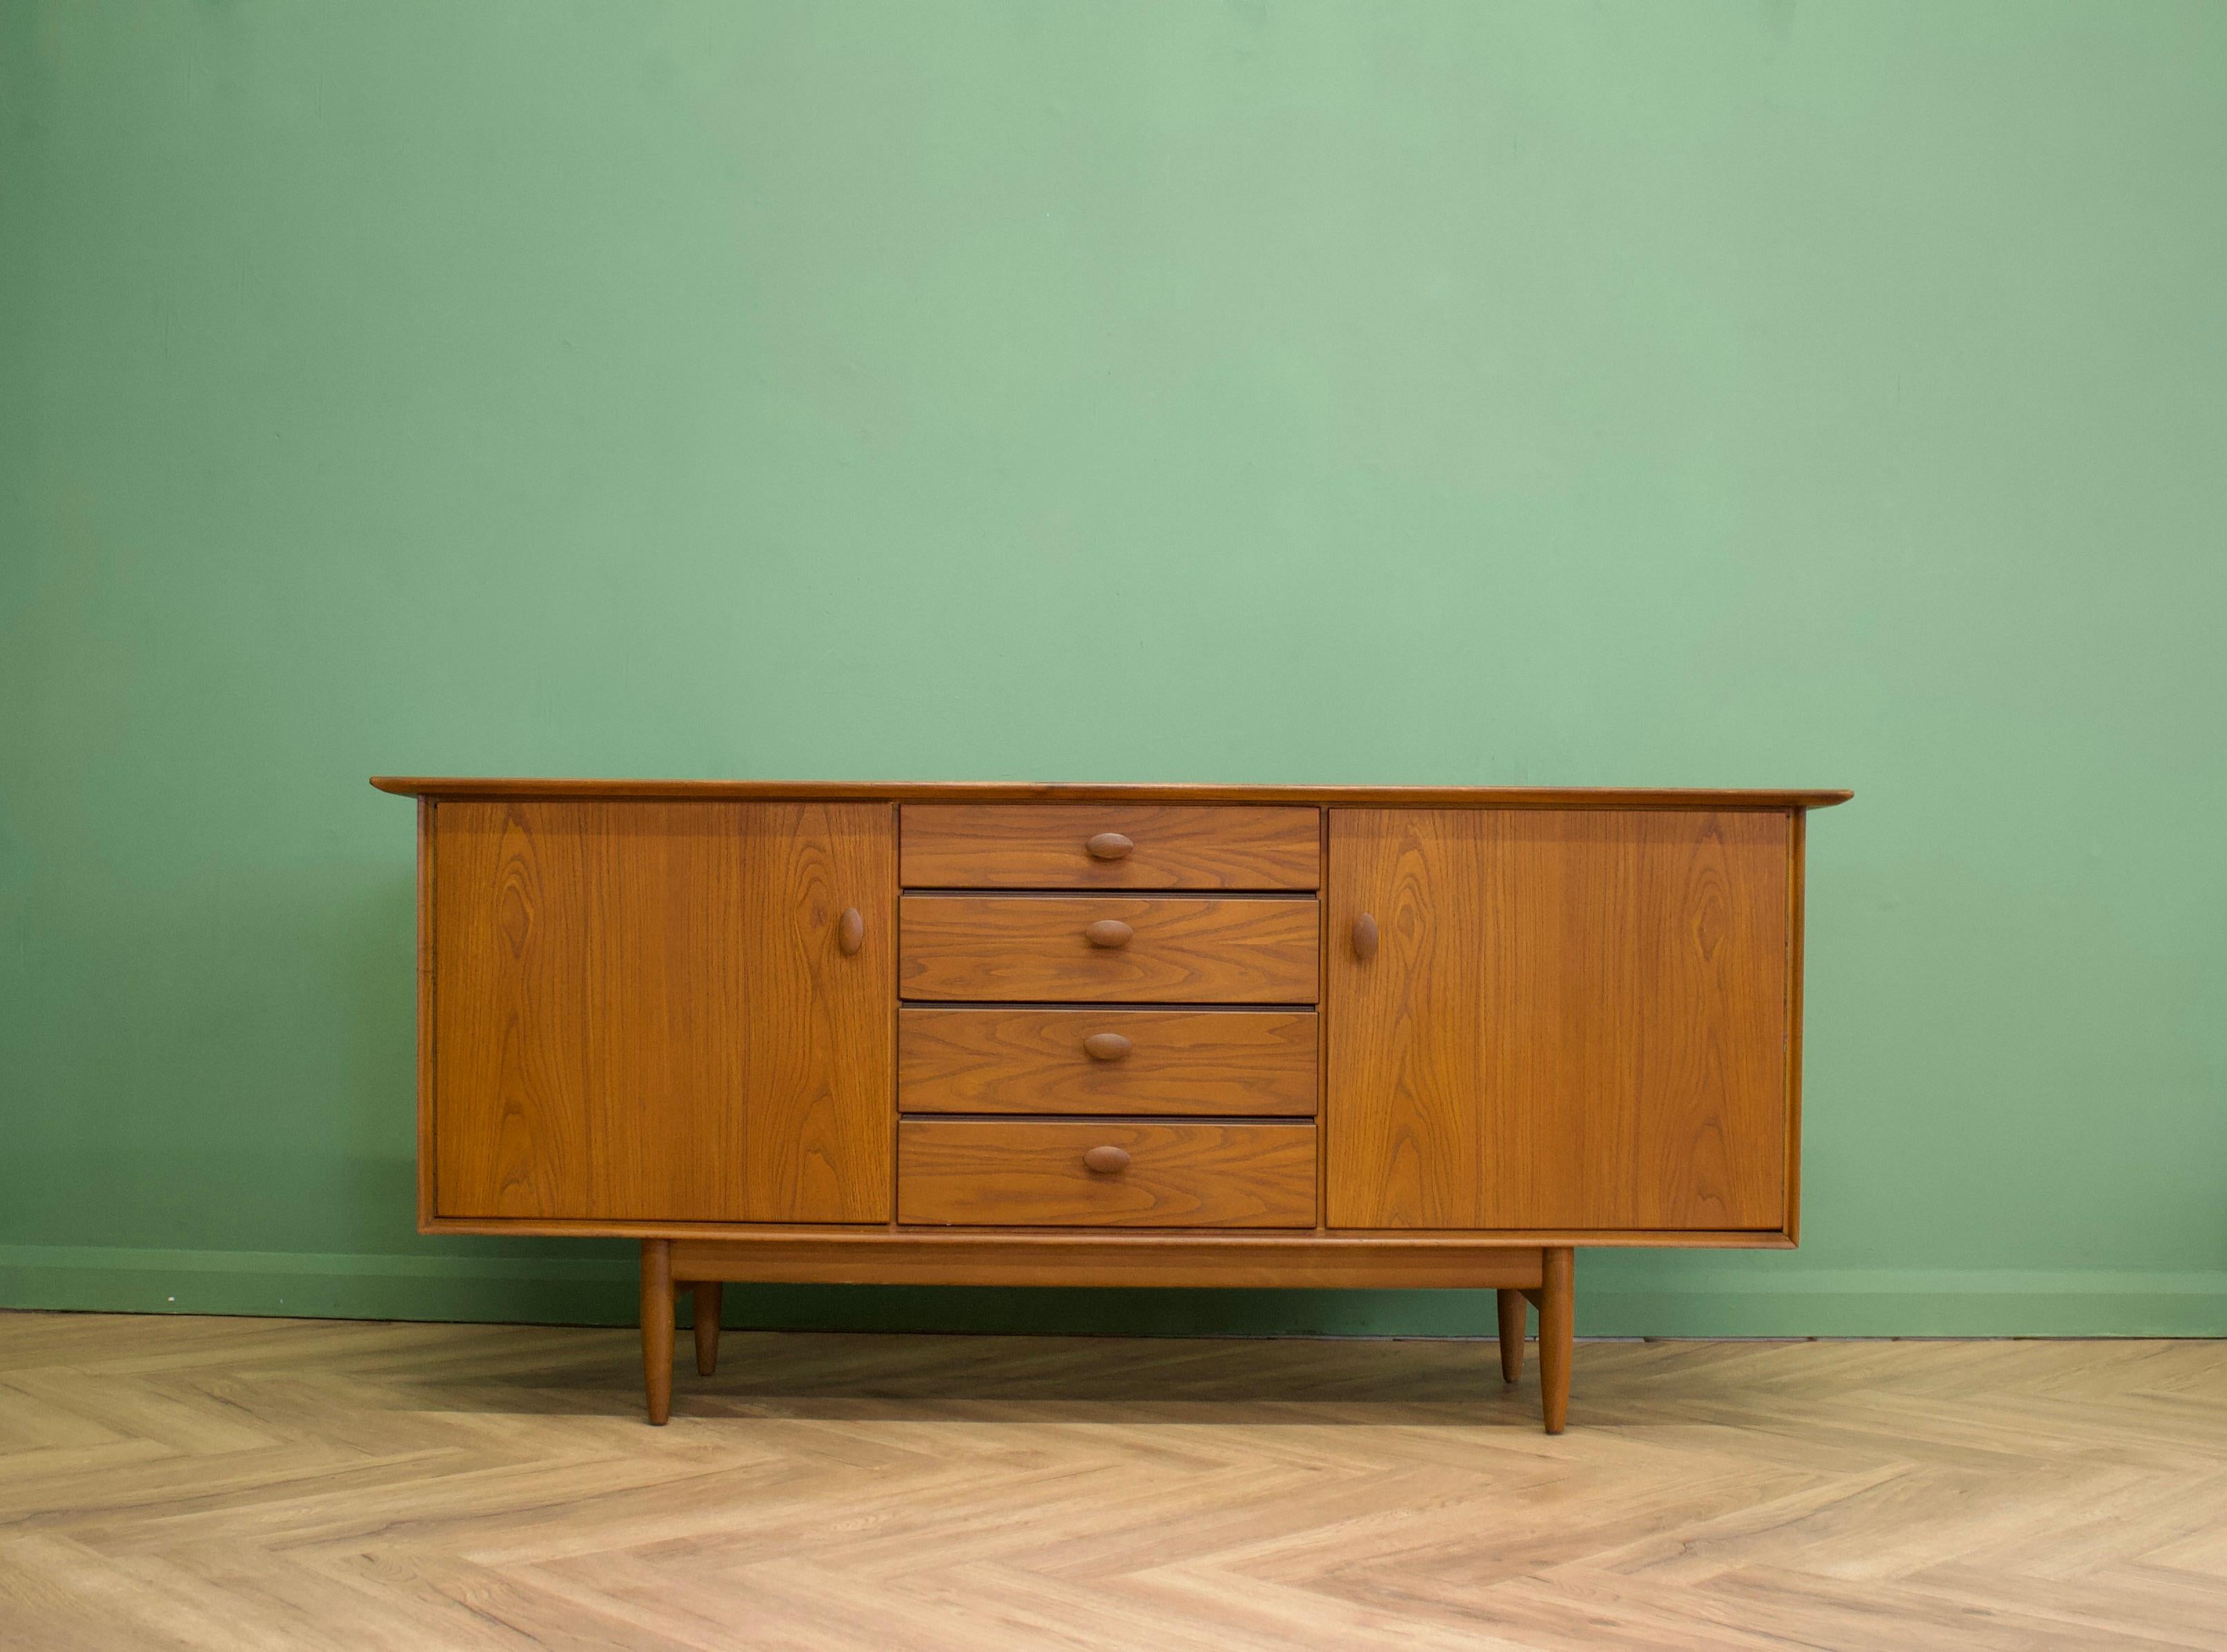 - Mid-Century Modern sideboard.
- Featuring three drawers and two cupboards
- Manufactured in the UK
- By Scandart
- Made from elm and elm veneer.